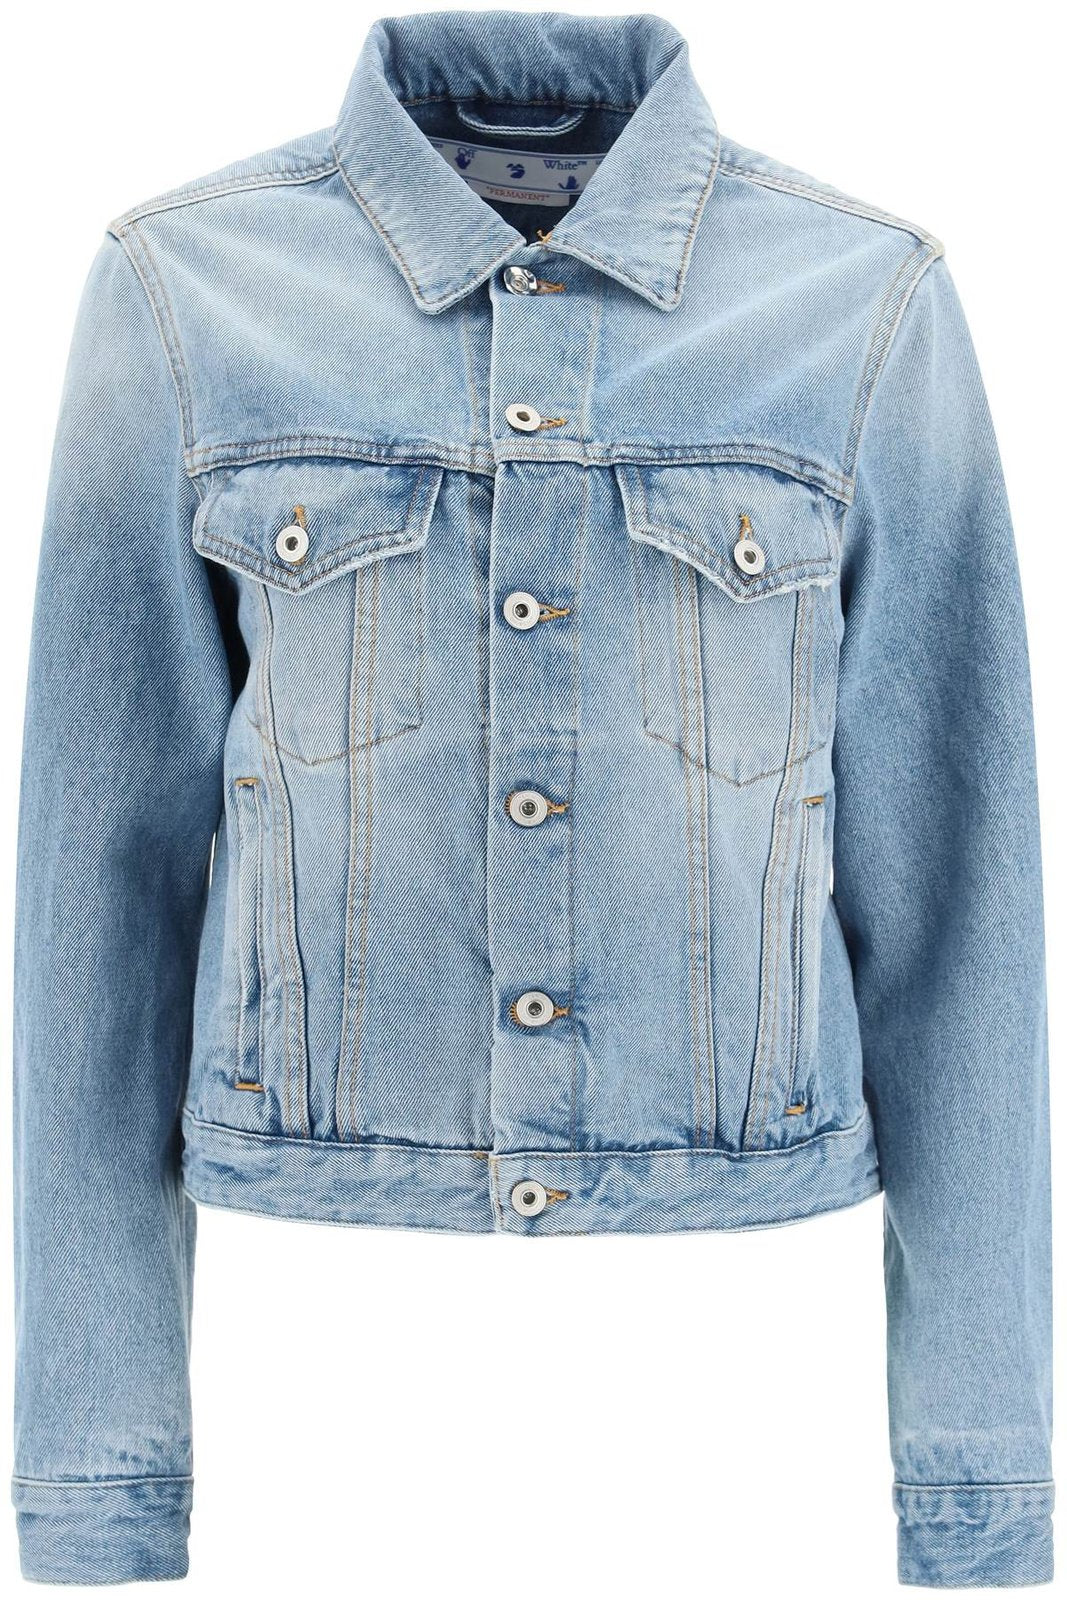 Off-White Buttoned Long-Sleeved Denim Jacket